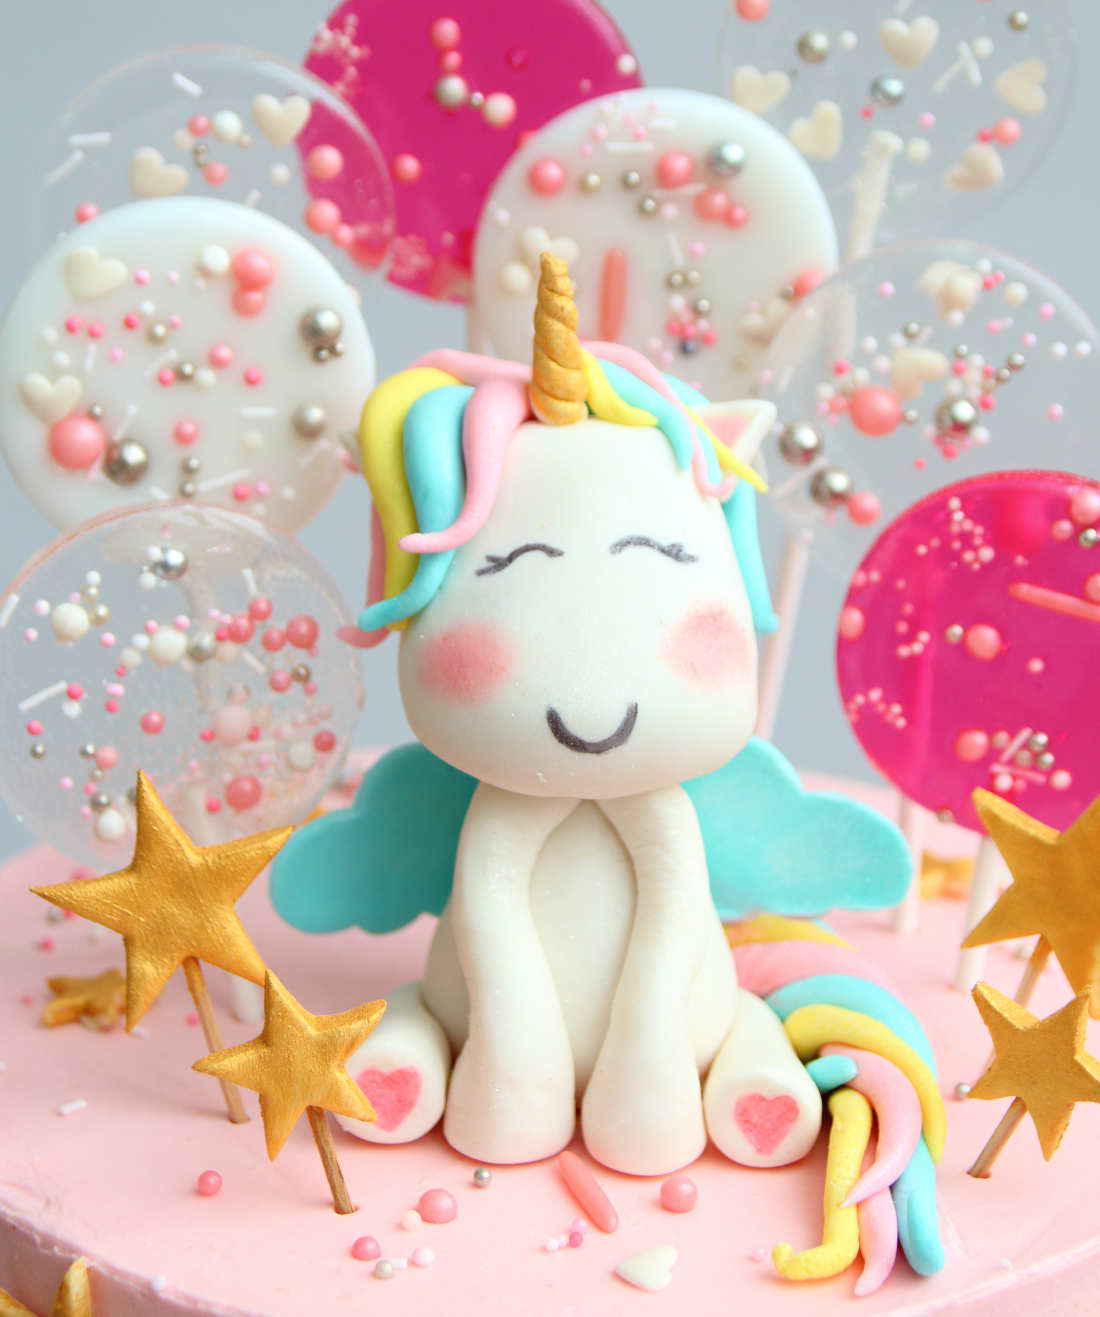 Cake with a unicorn made from pastry fondant